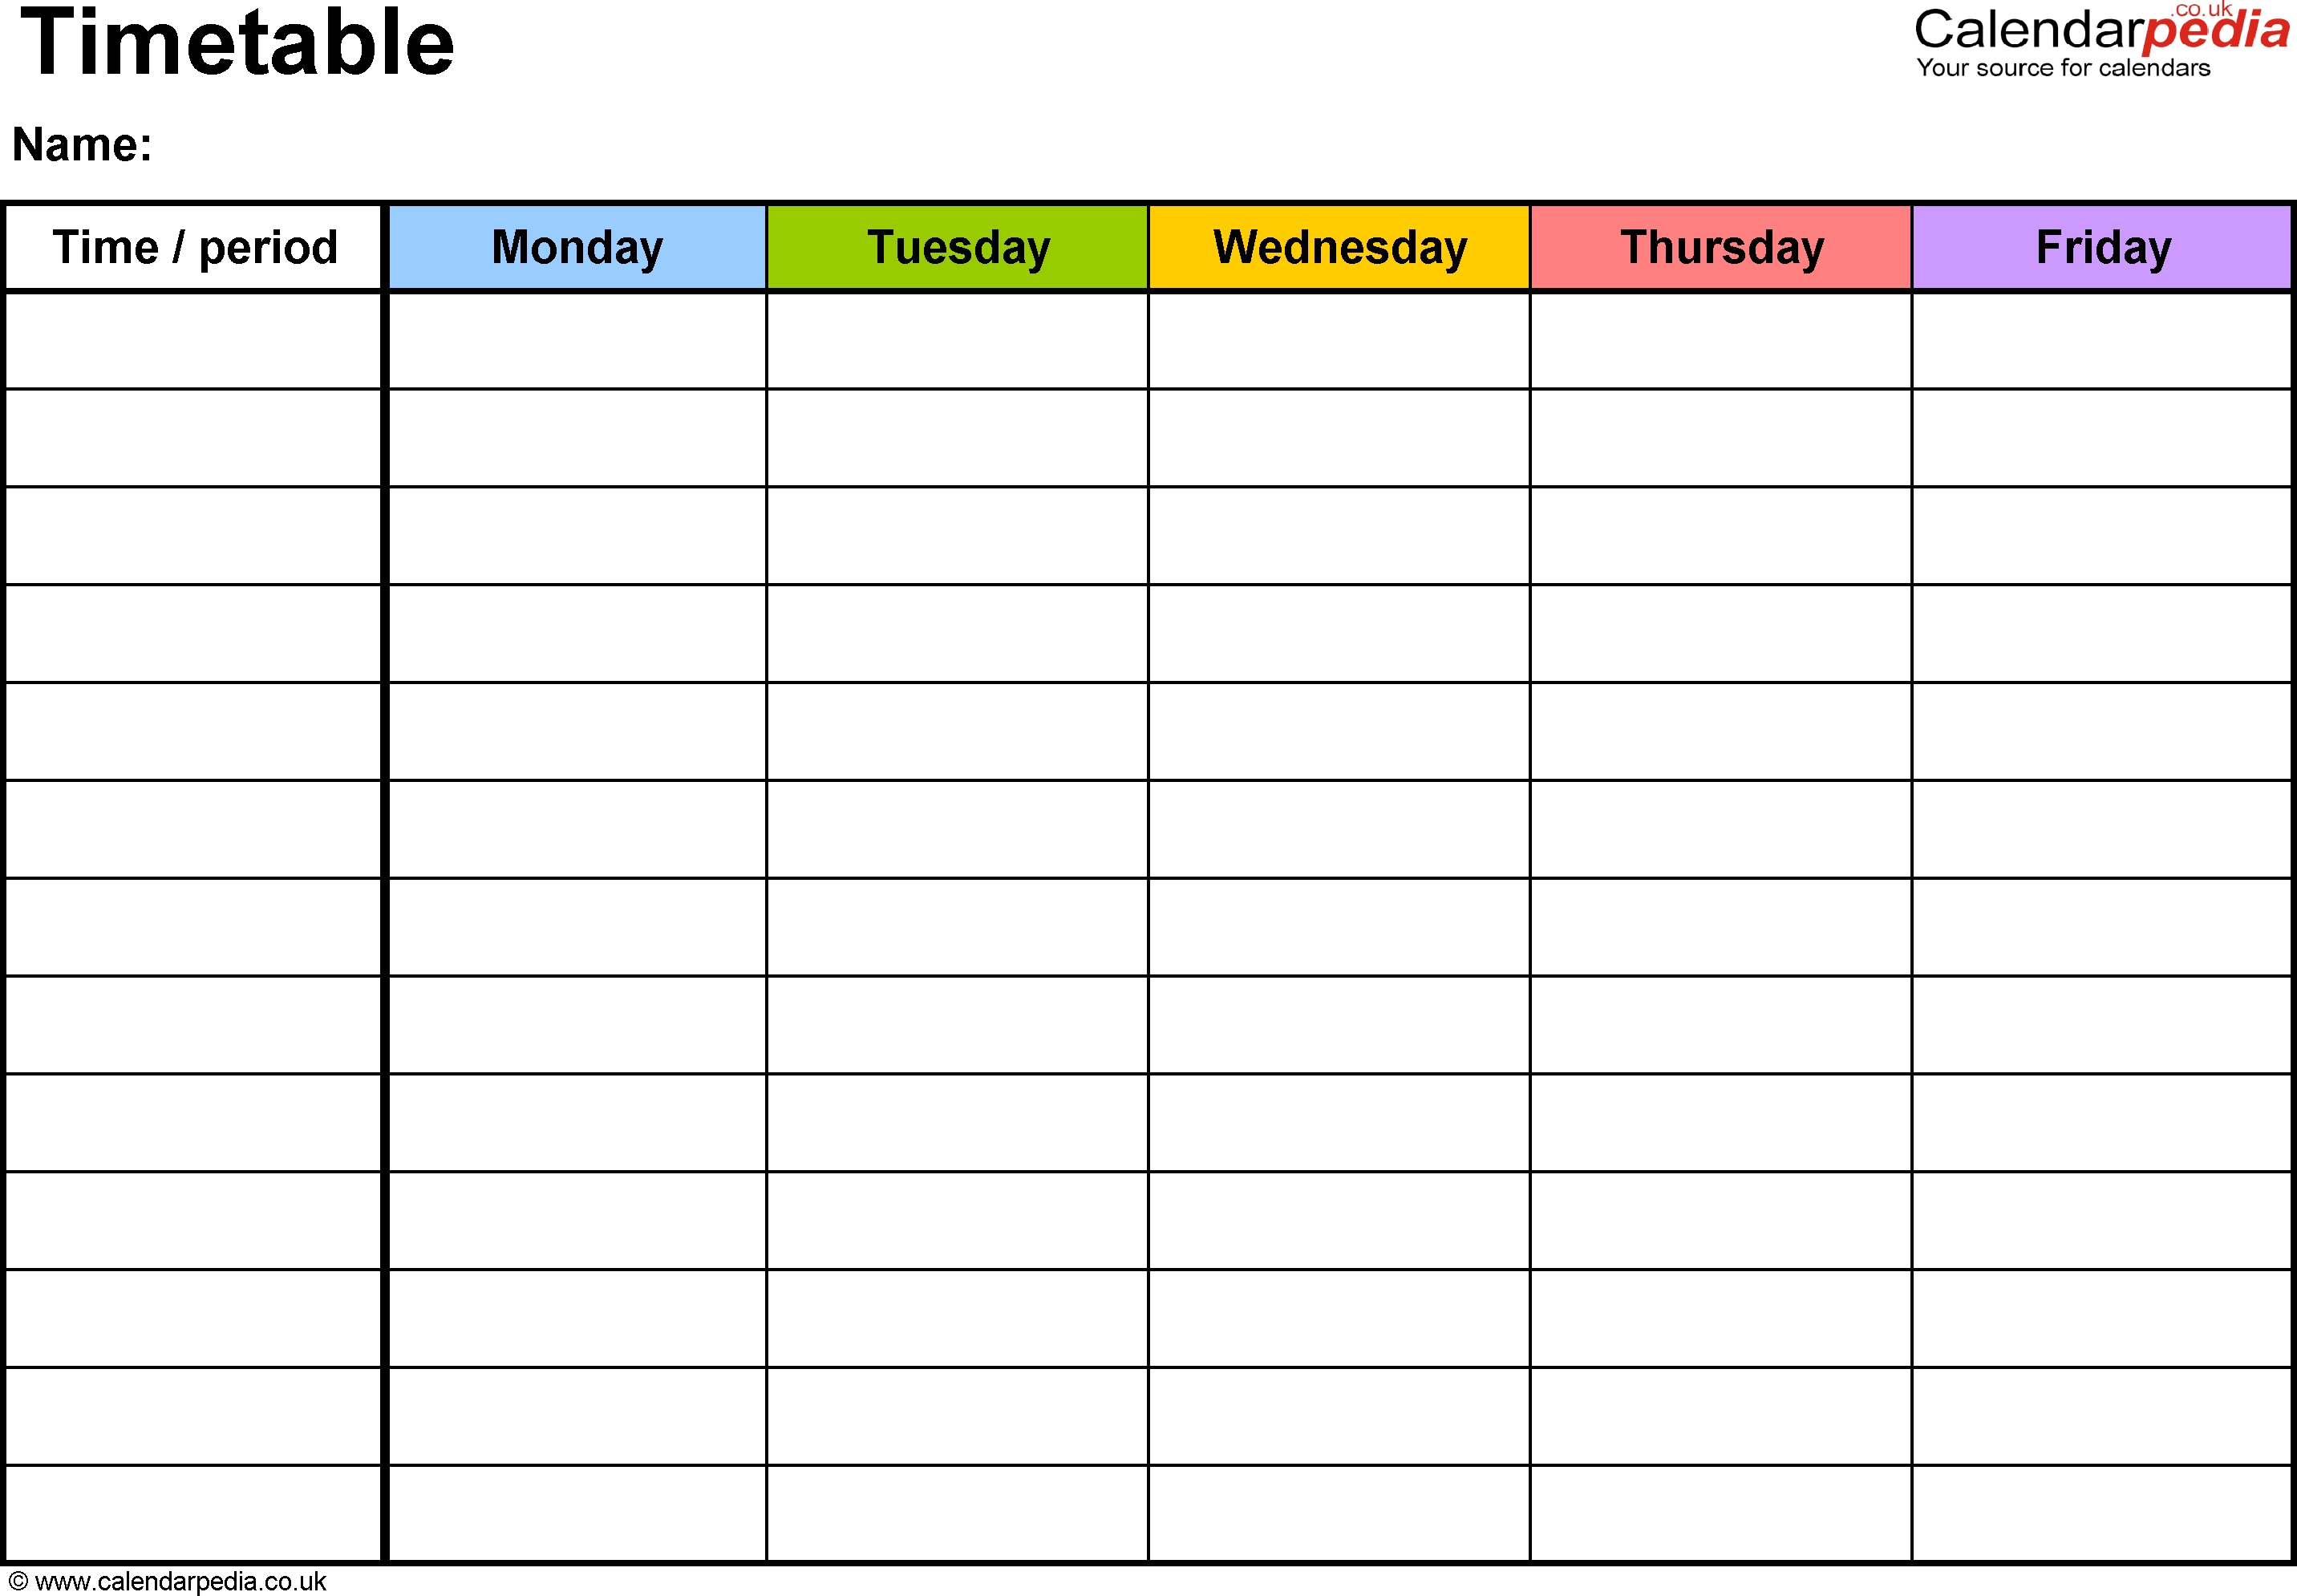 Pdf Timetable Template 2: Landscape Format, A4, 1 Page, Monday To throughout Blank 5 Day School Timetable